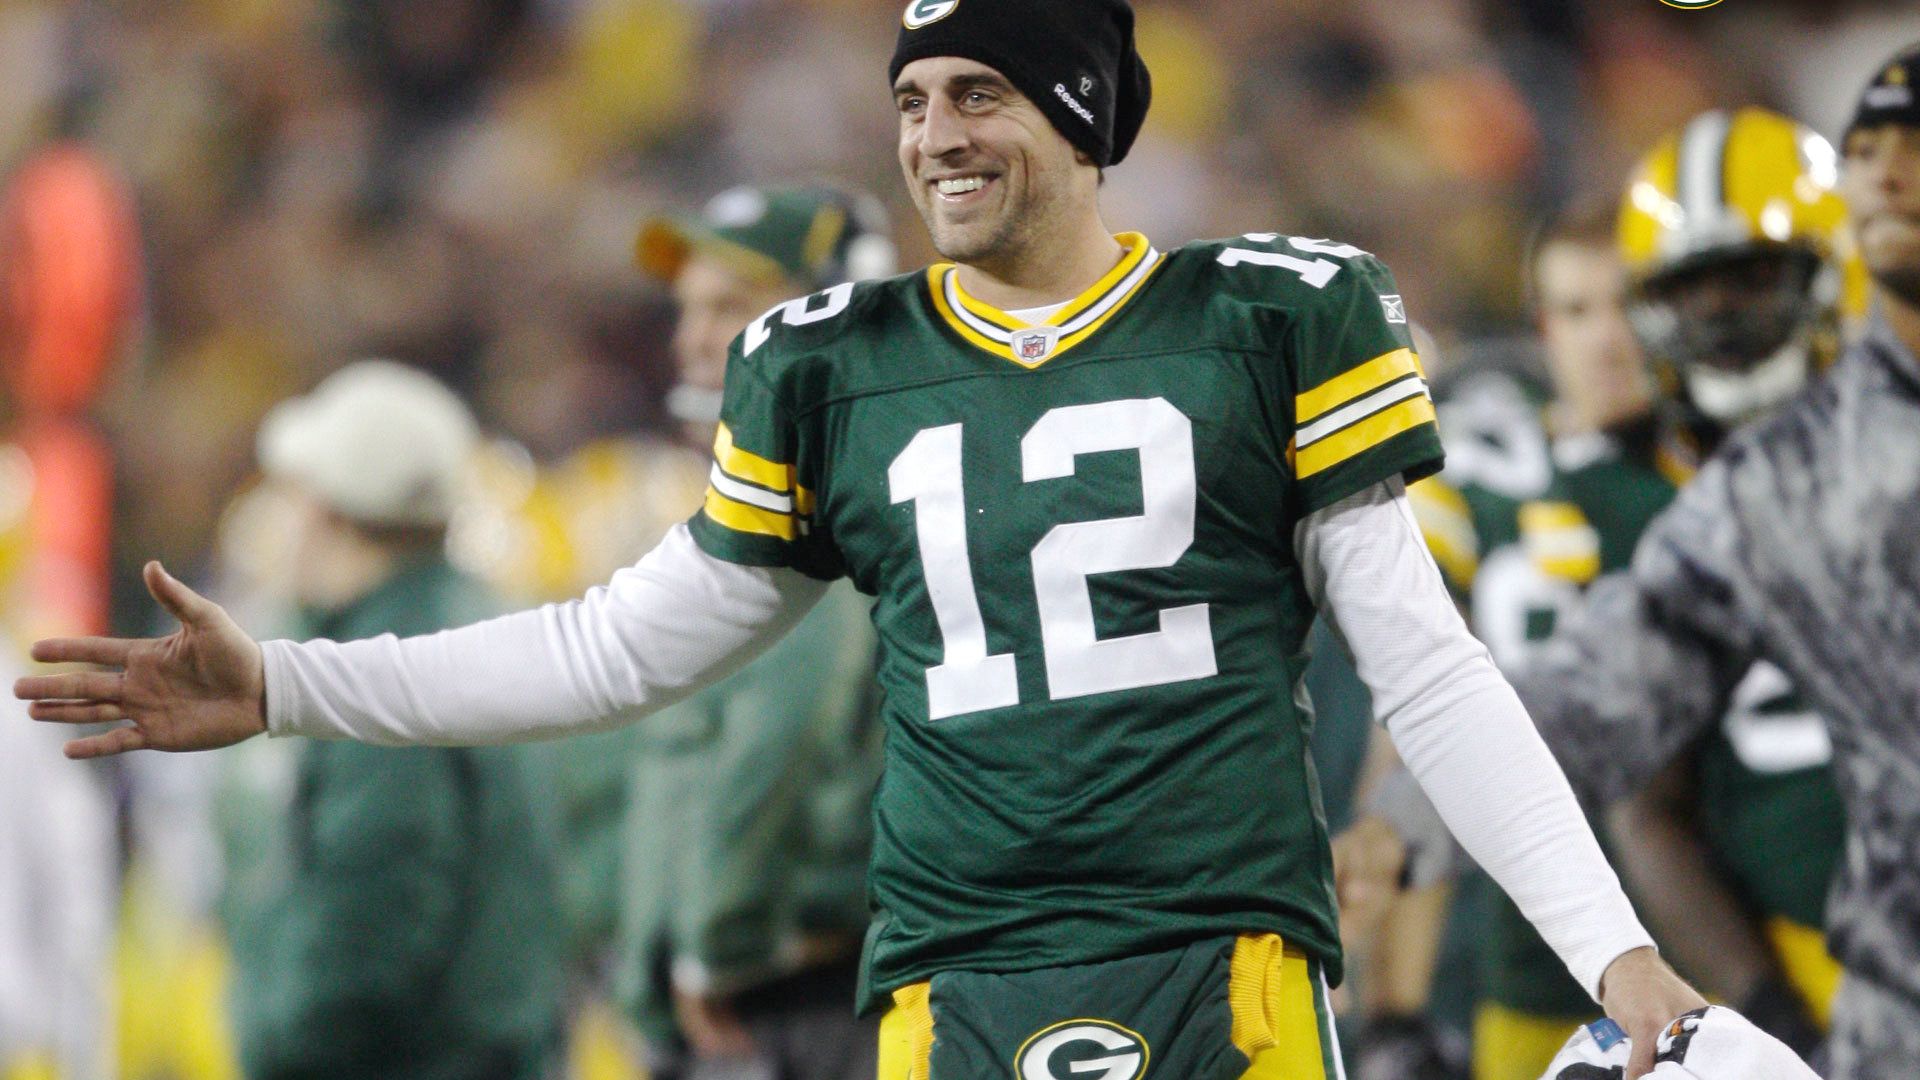 Aaron Rodgers Football Backgrounds 6221 1920x1080 px ...